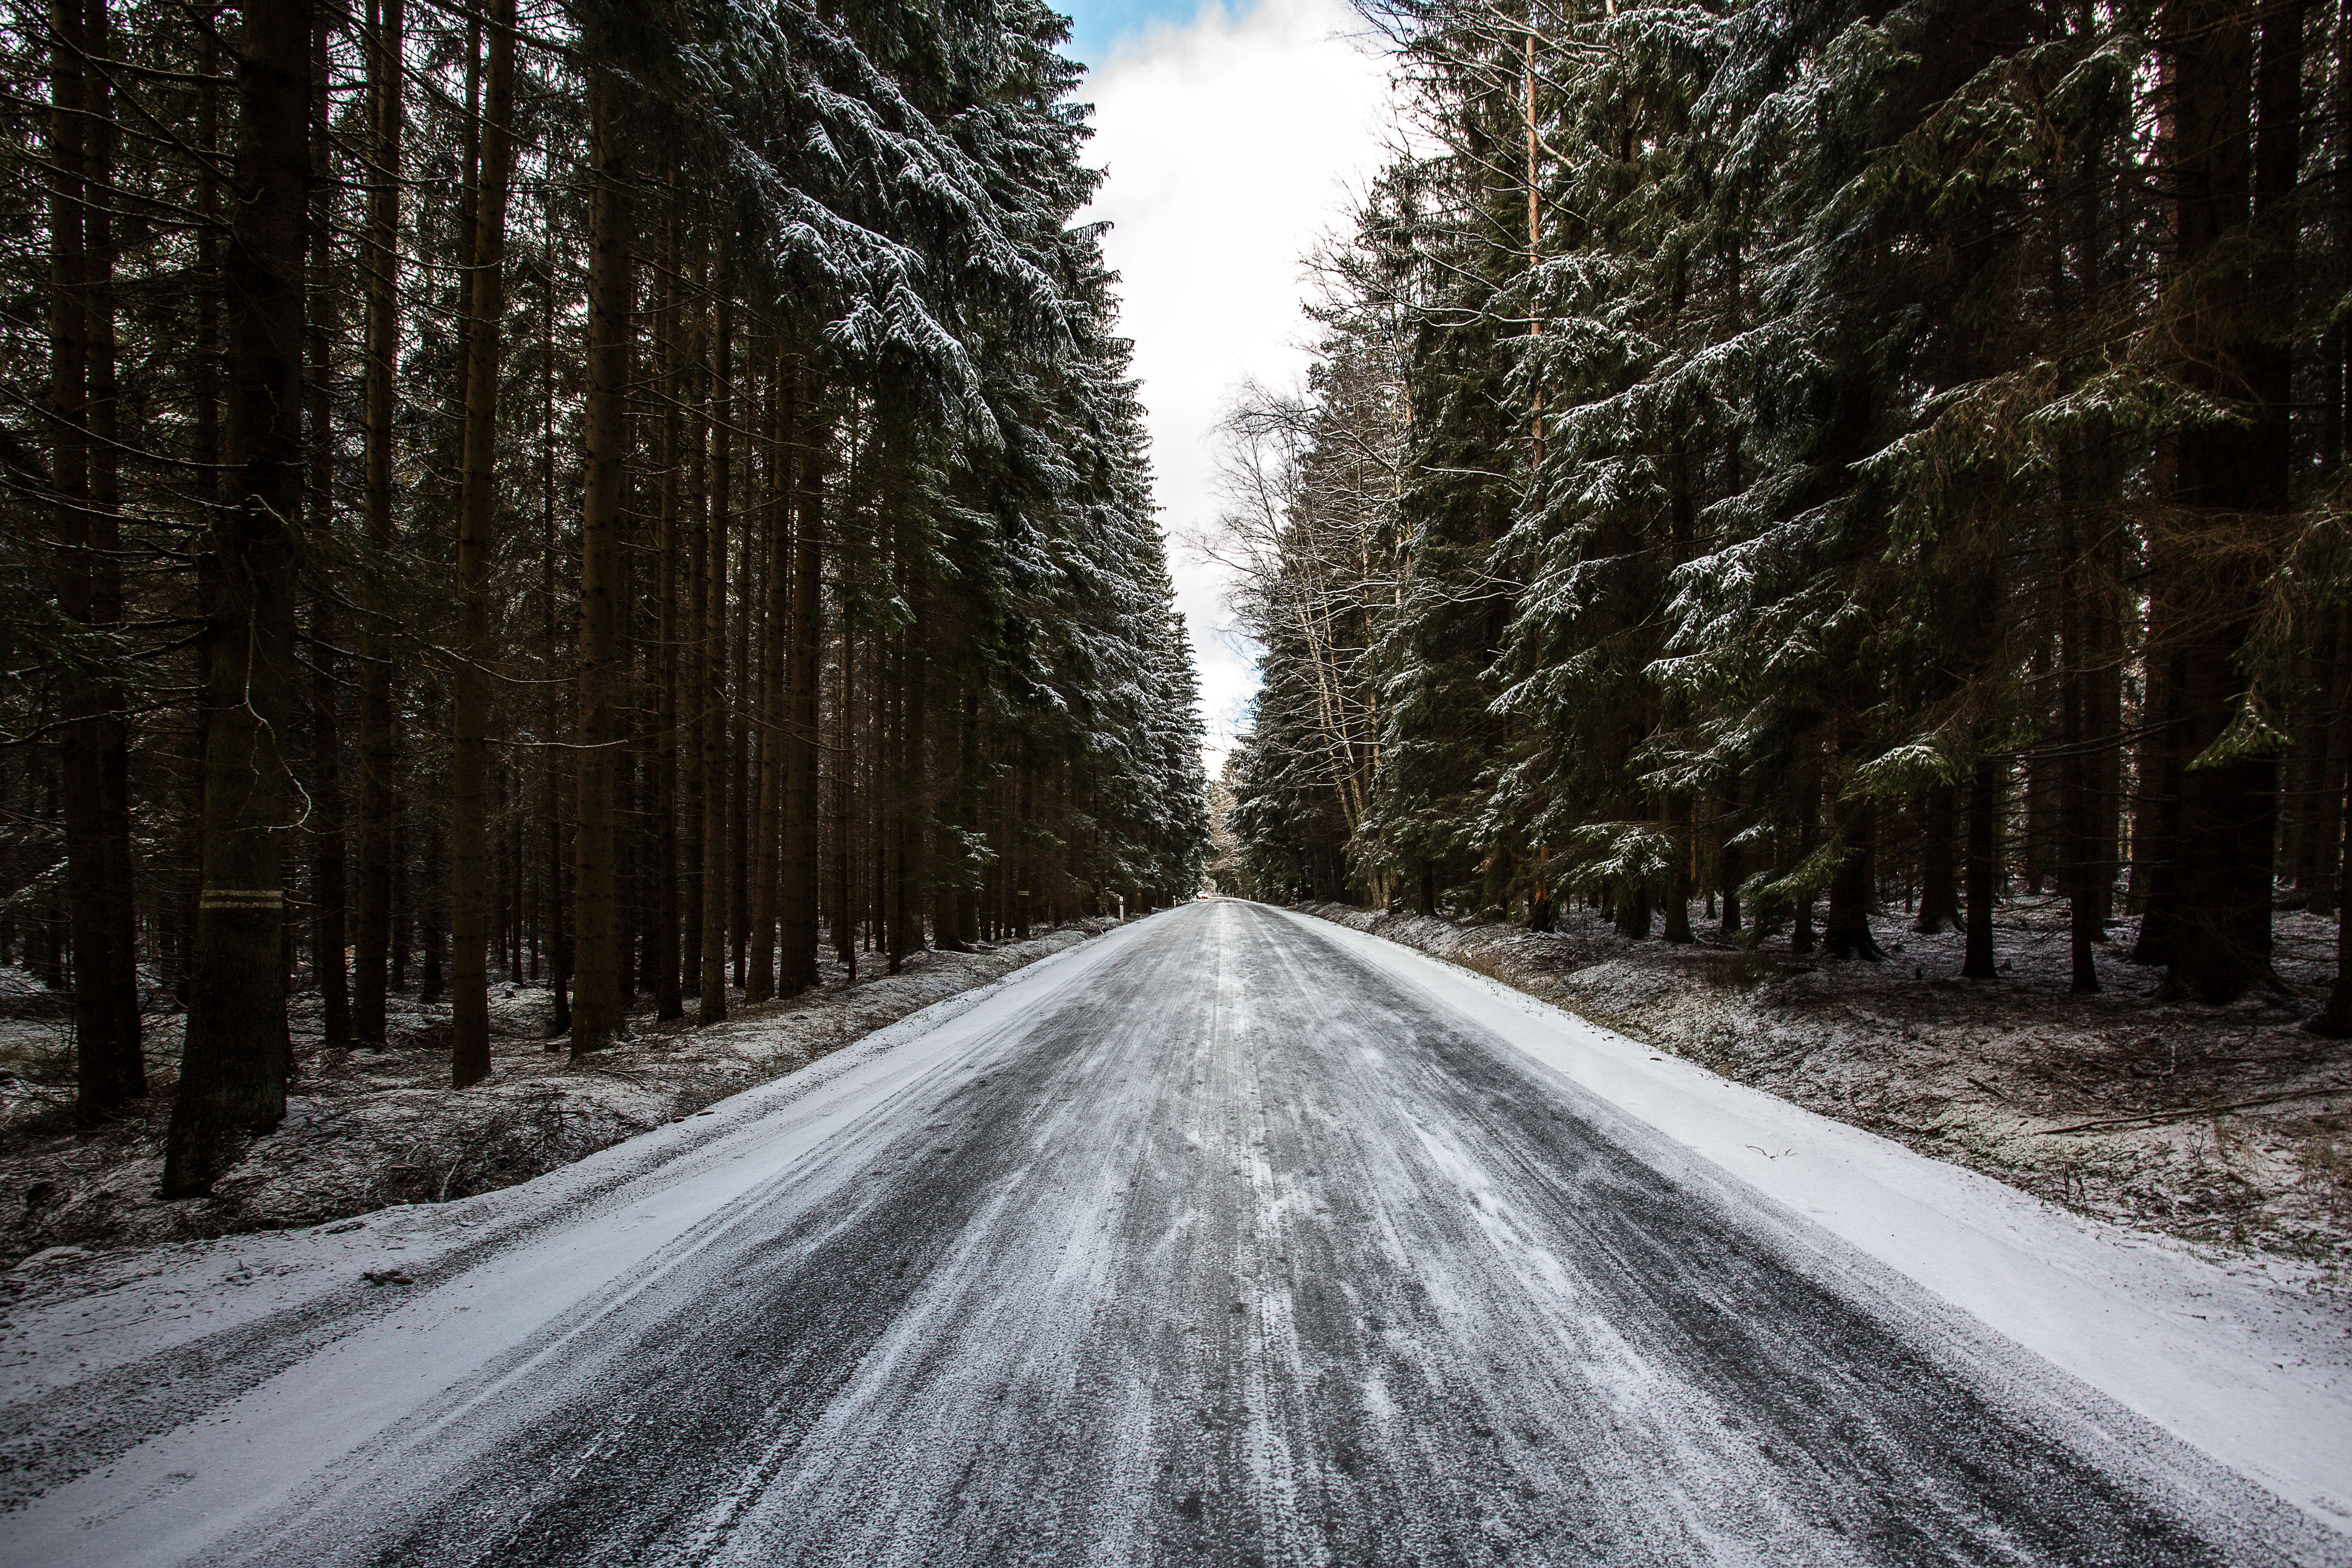 Windows Backgrounds forest, snow, winter, nature, trees, pine, road